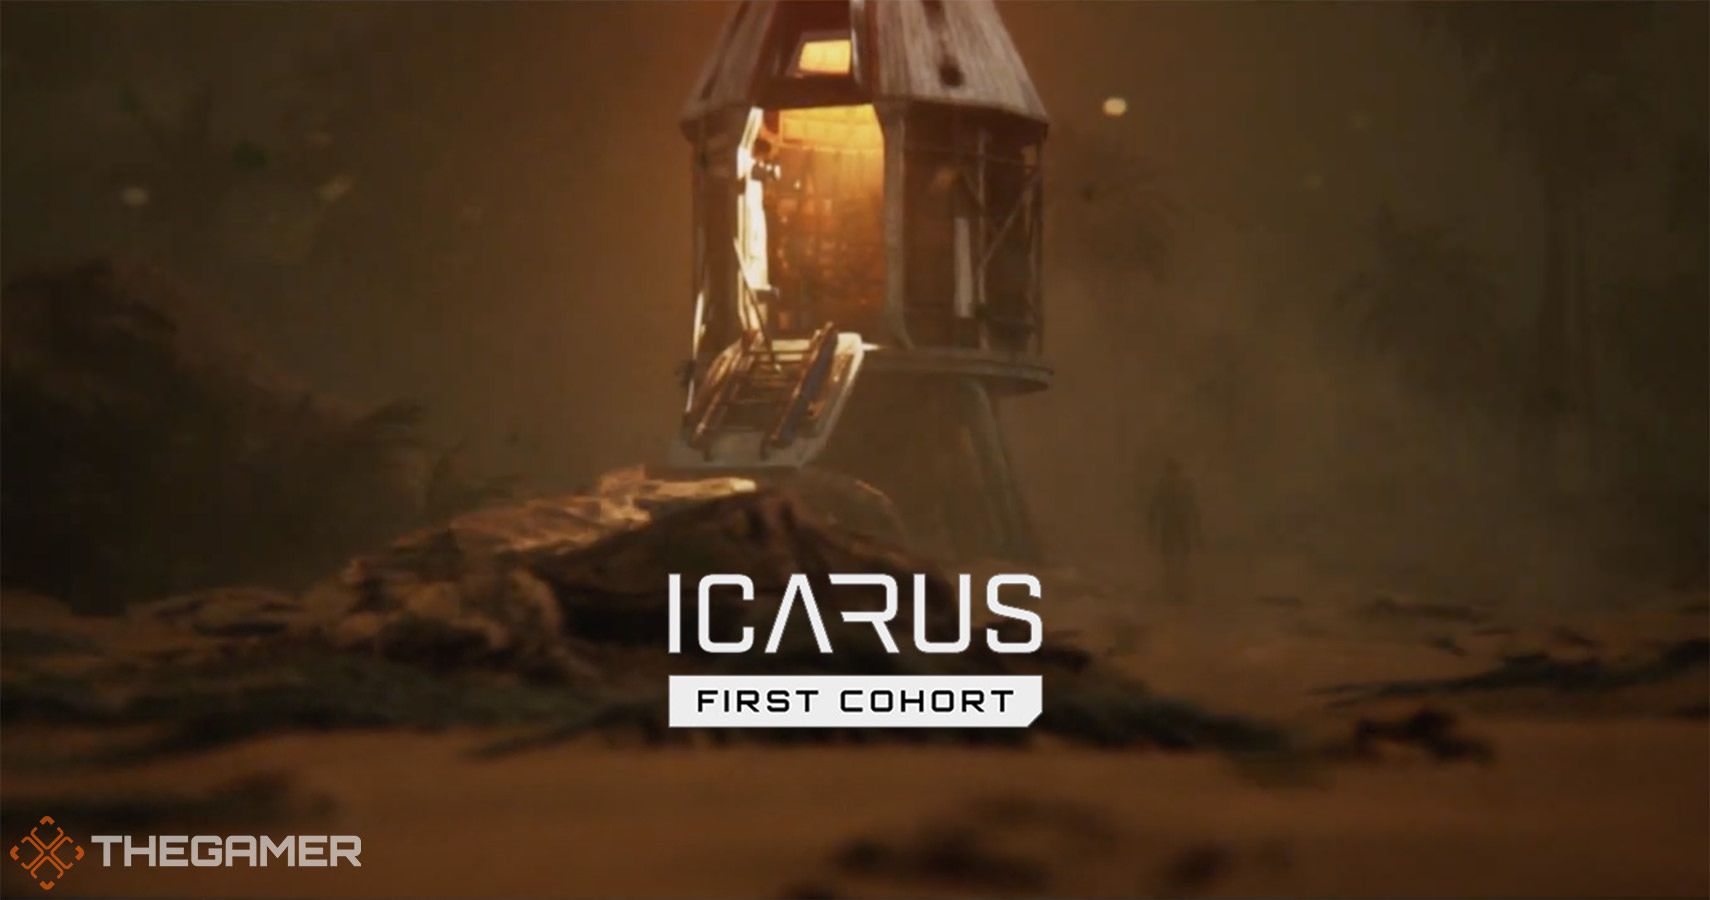 DayZ Creator's New Survival Game, Icarus, Releases This Week - GameSpot